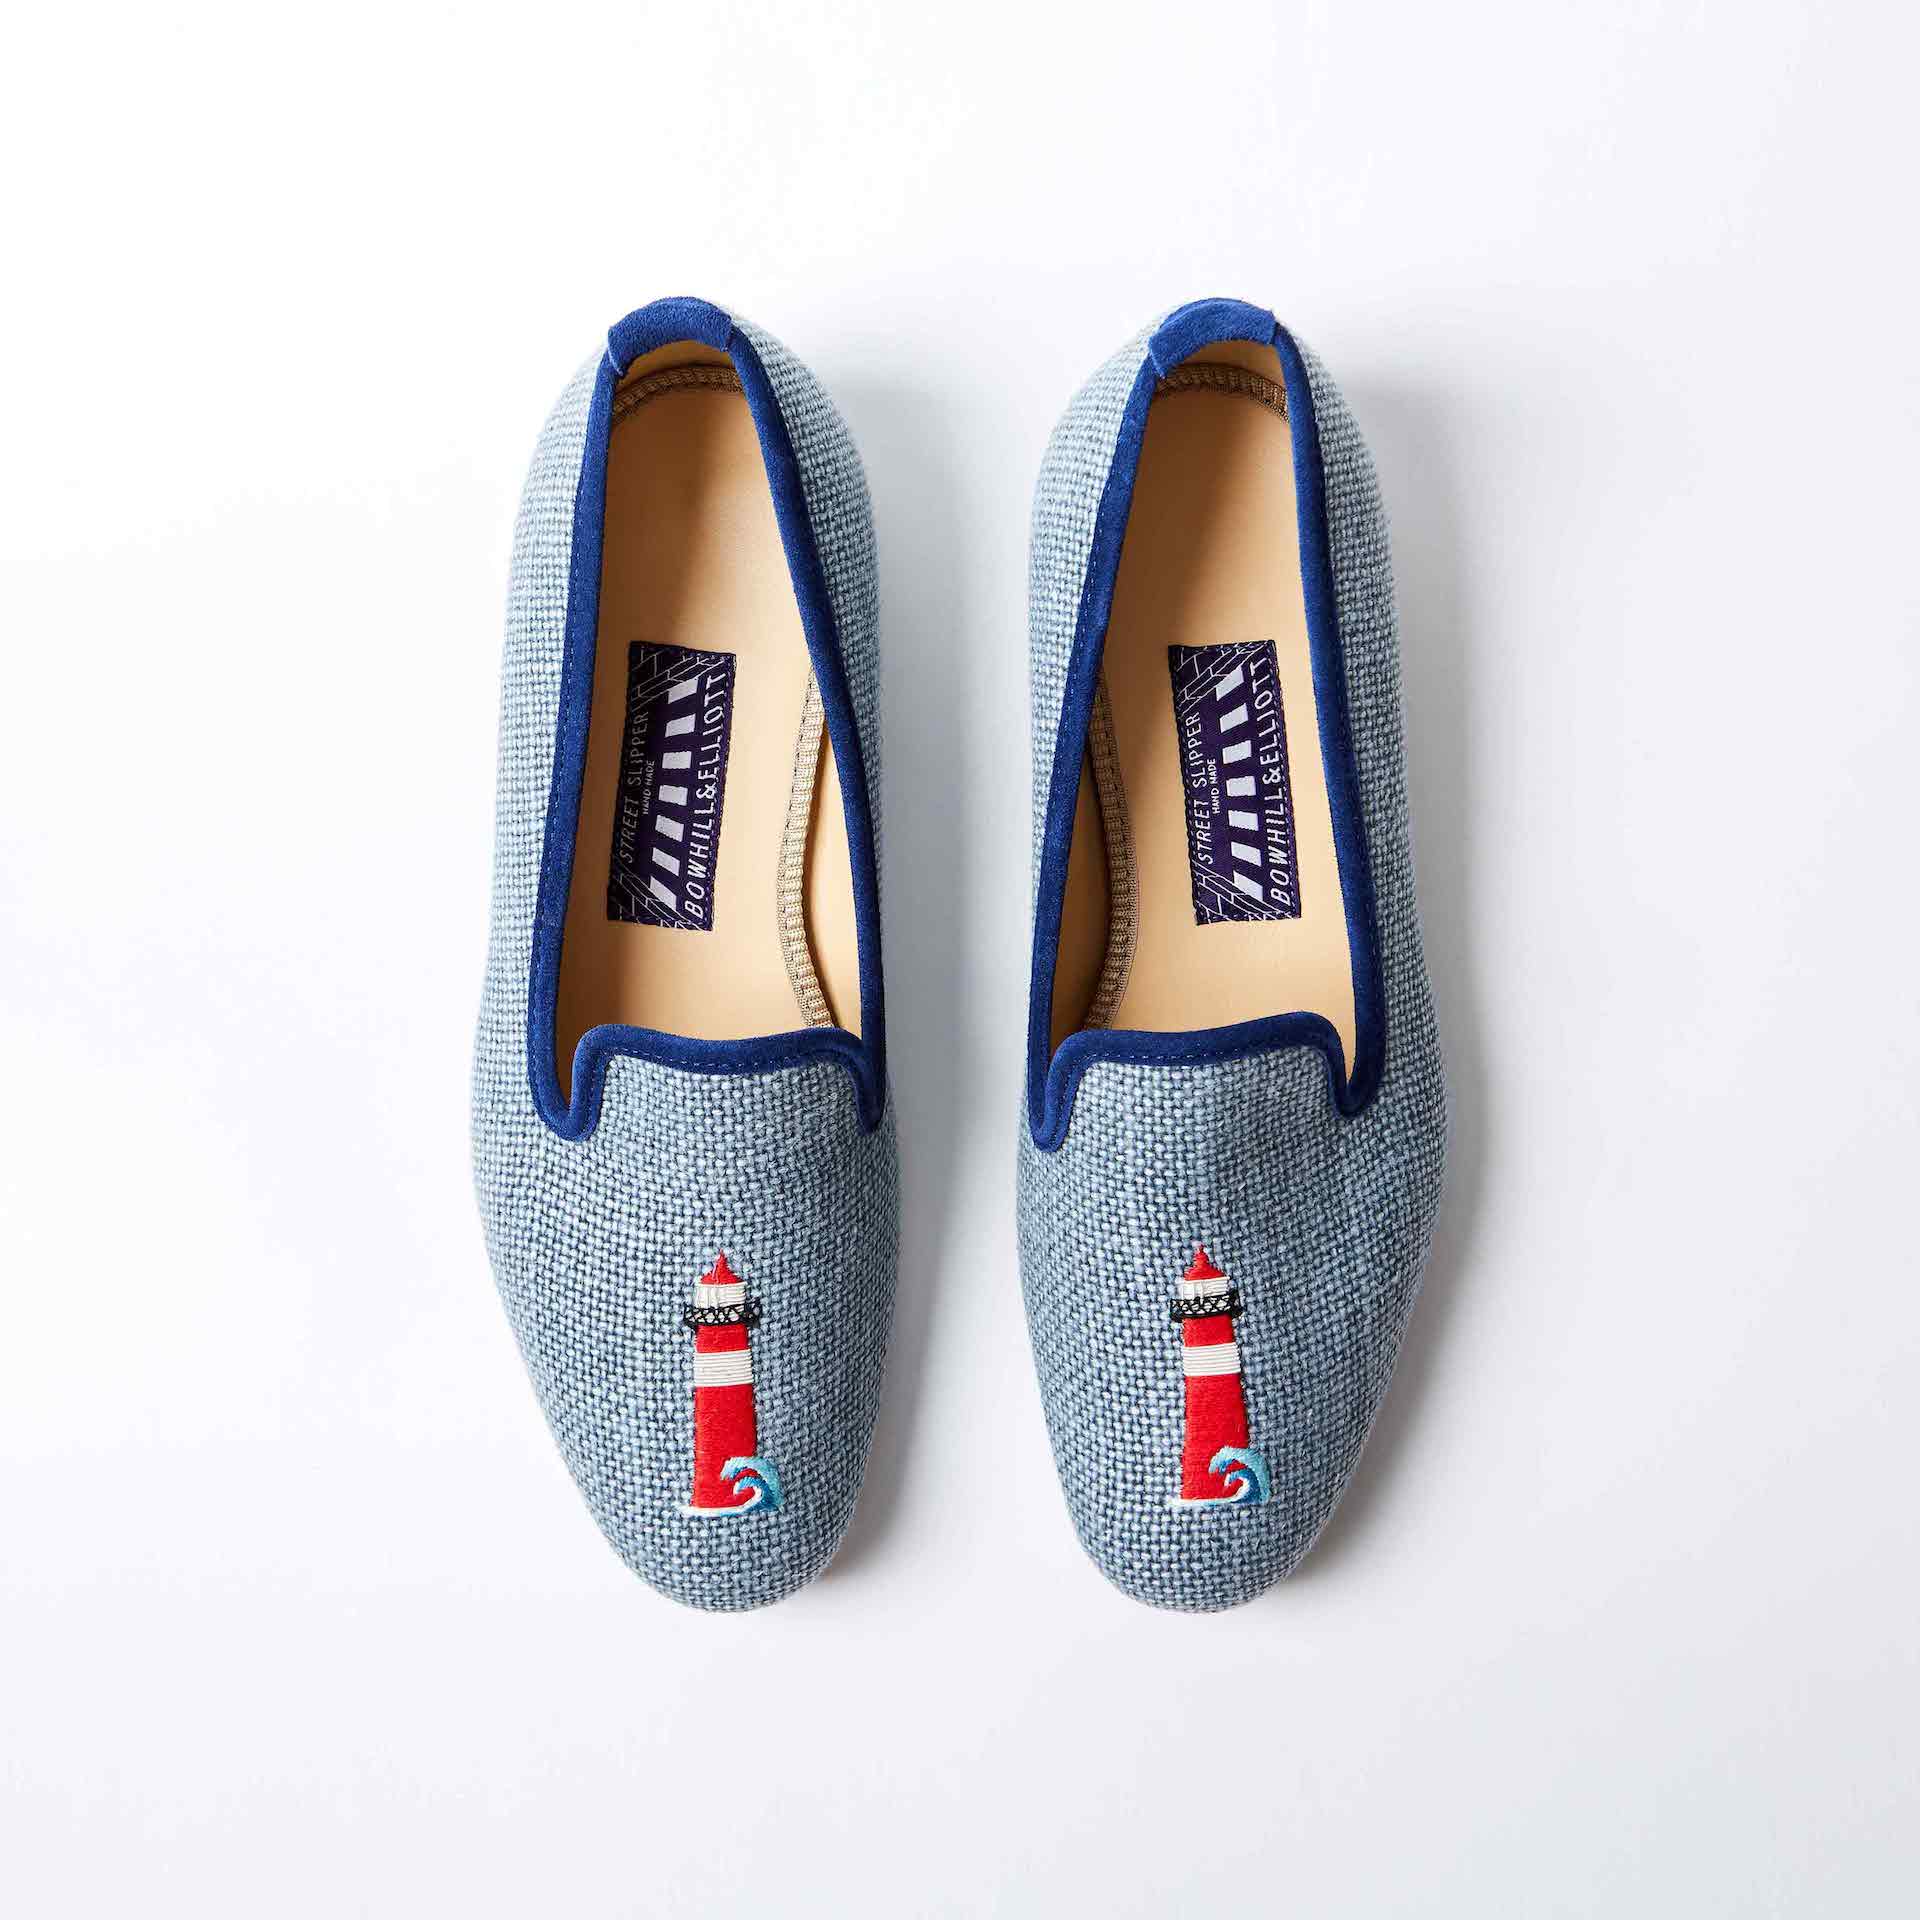 Denim Linen Albert Slippers with Embroidered Lighthouse